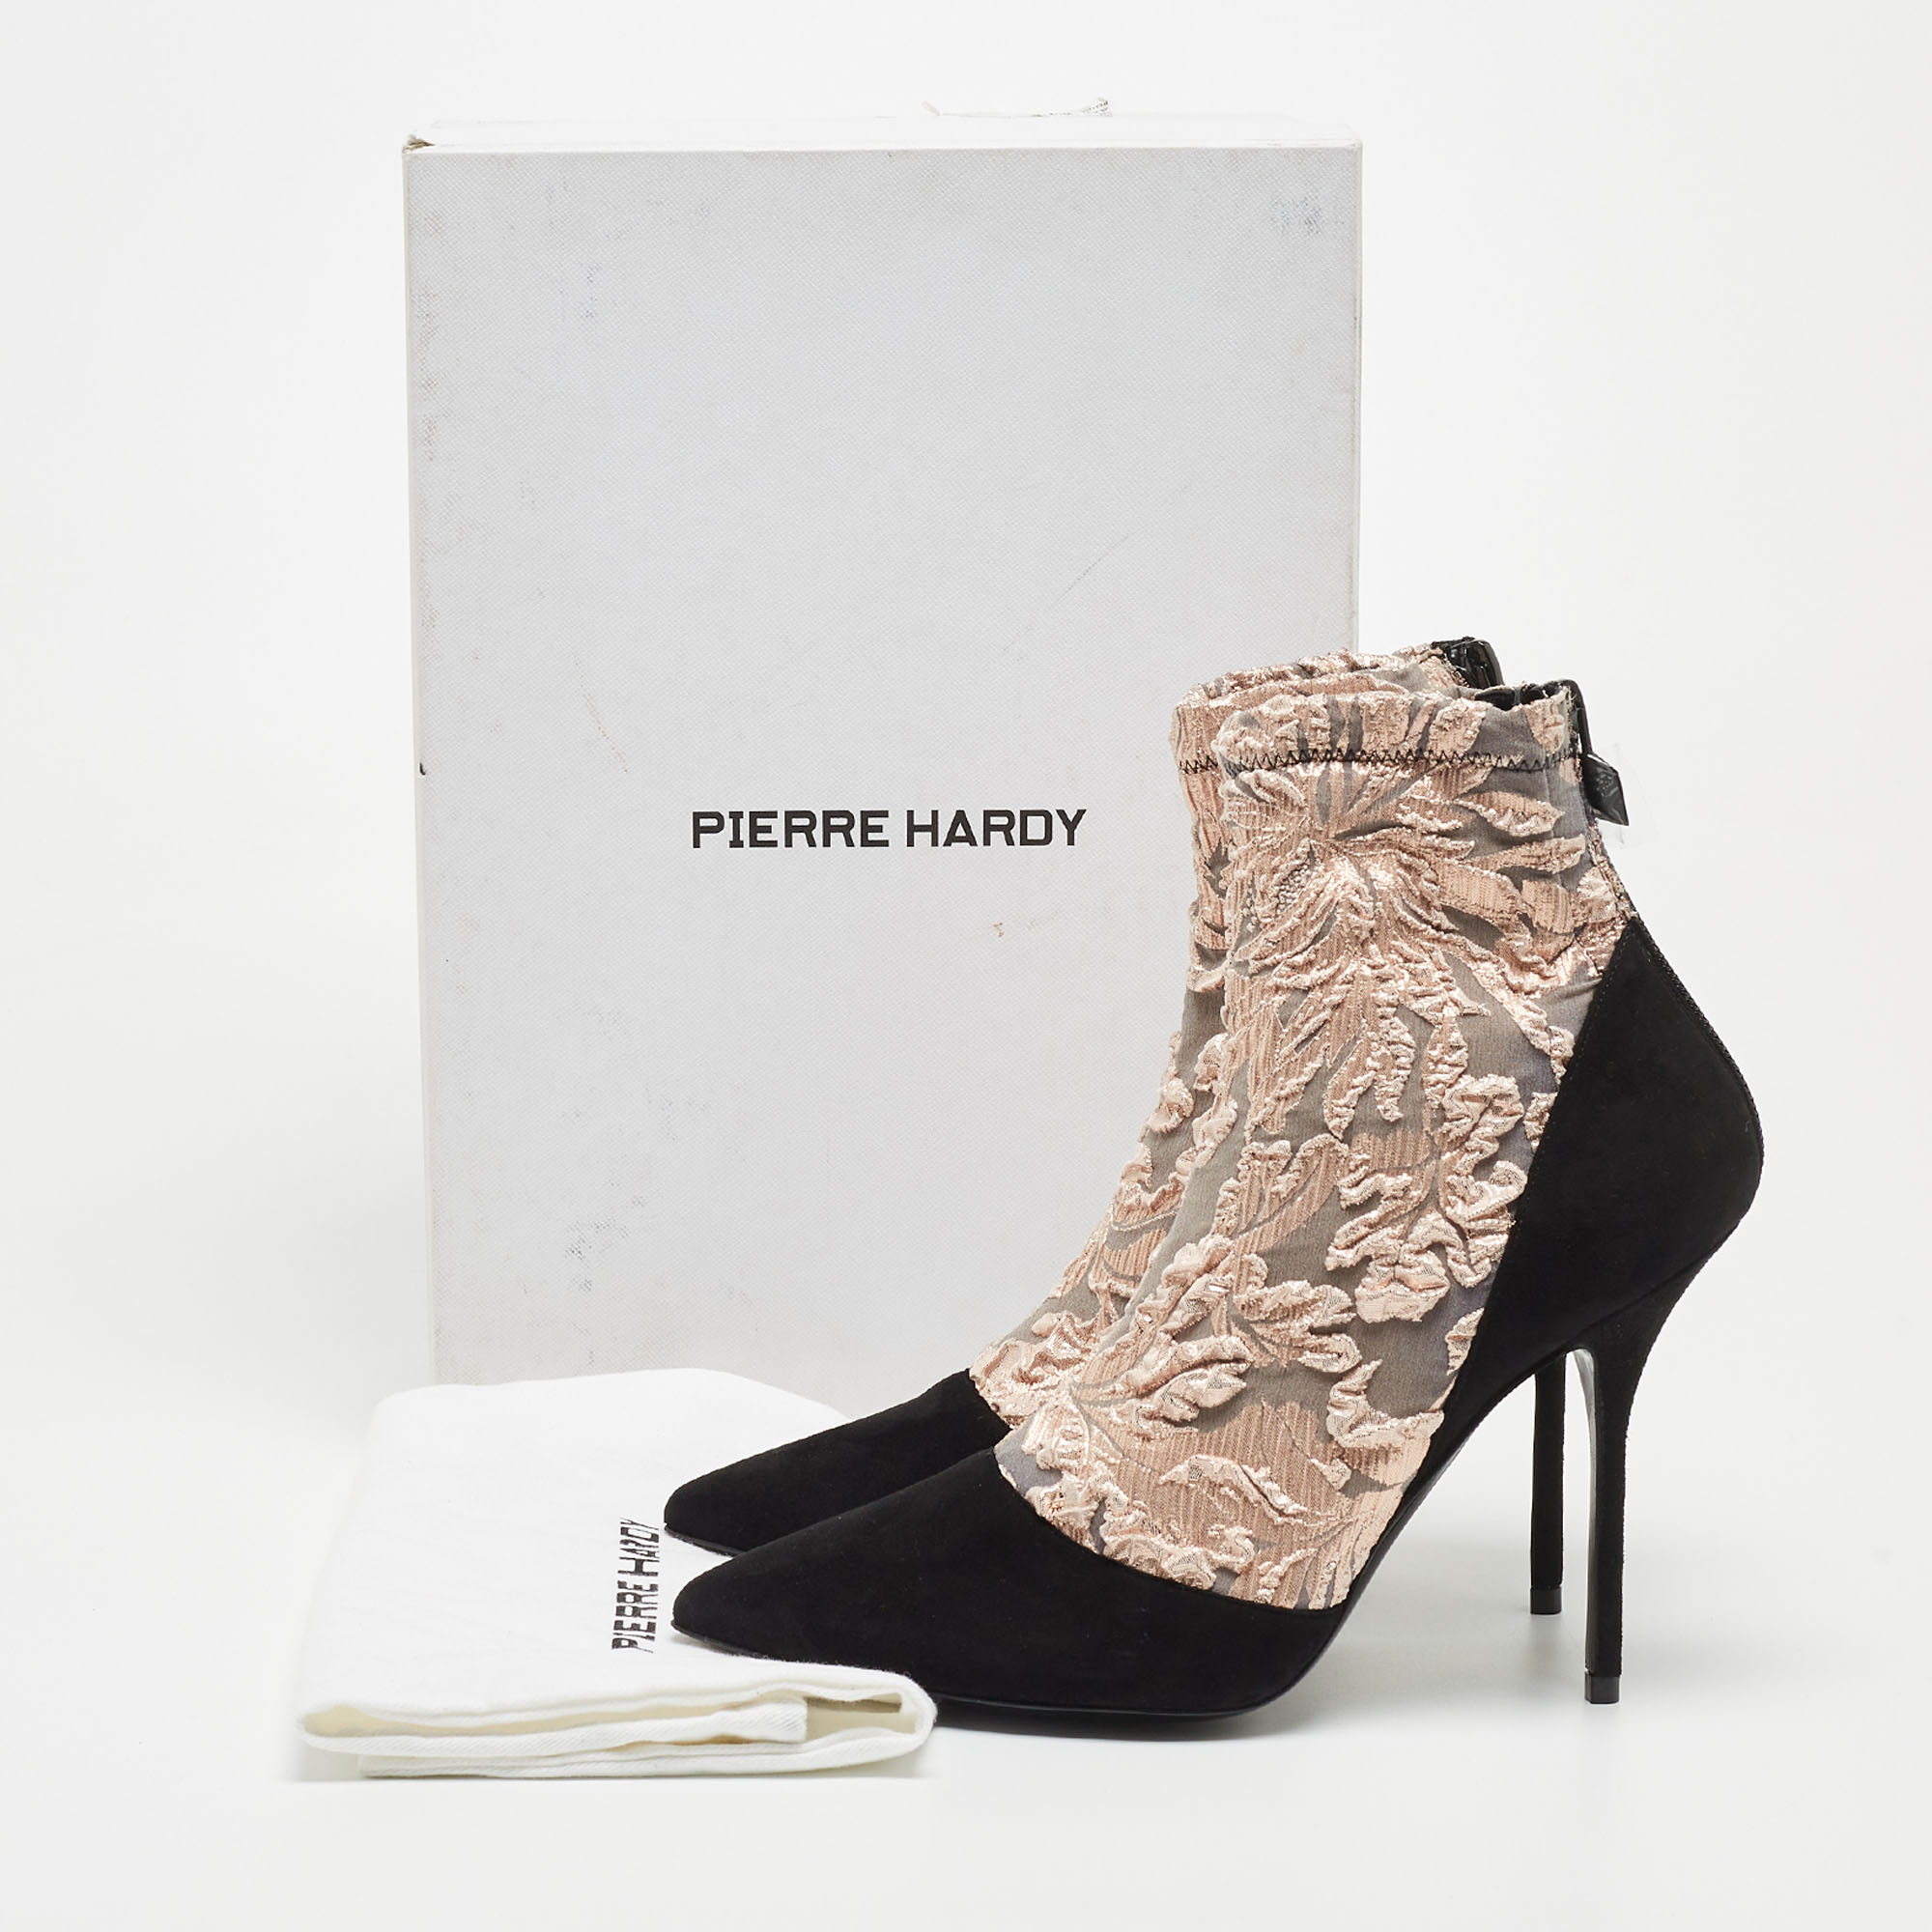 Pierre Hardy Black/Metallic Peach Fabric And Suede Dolly Pointed Toe Ankle Booties Size 38.5